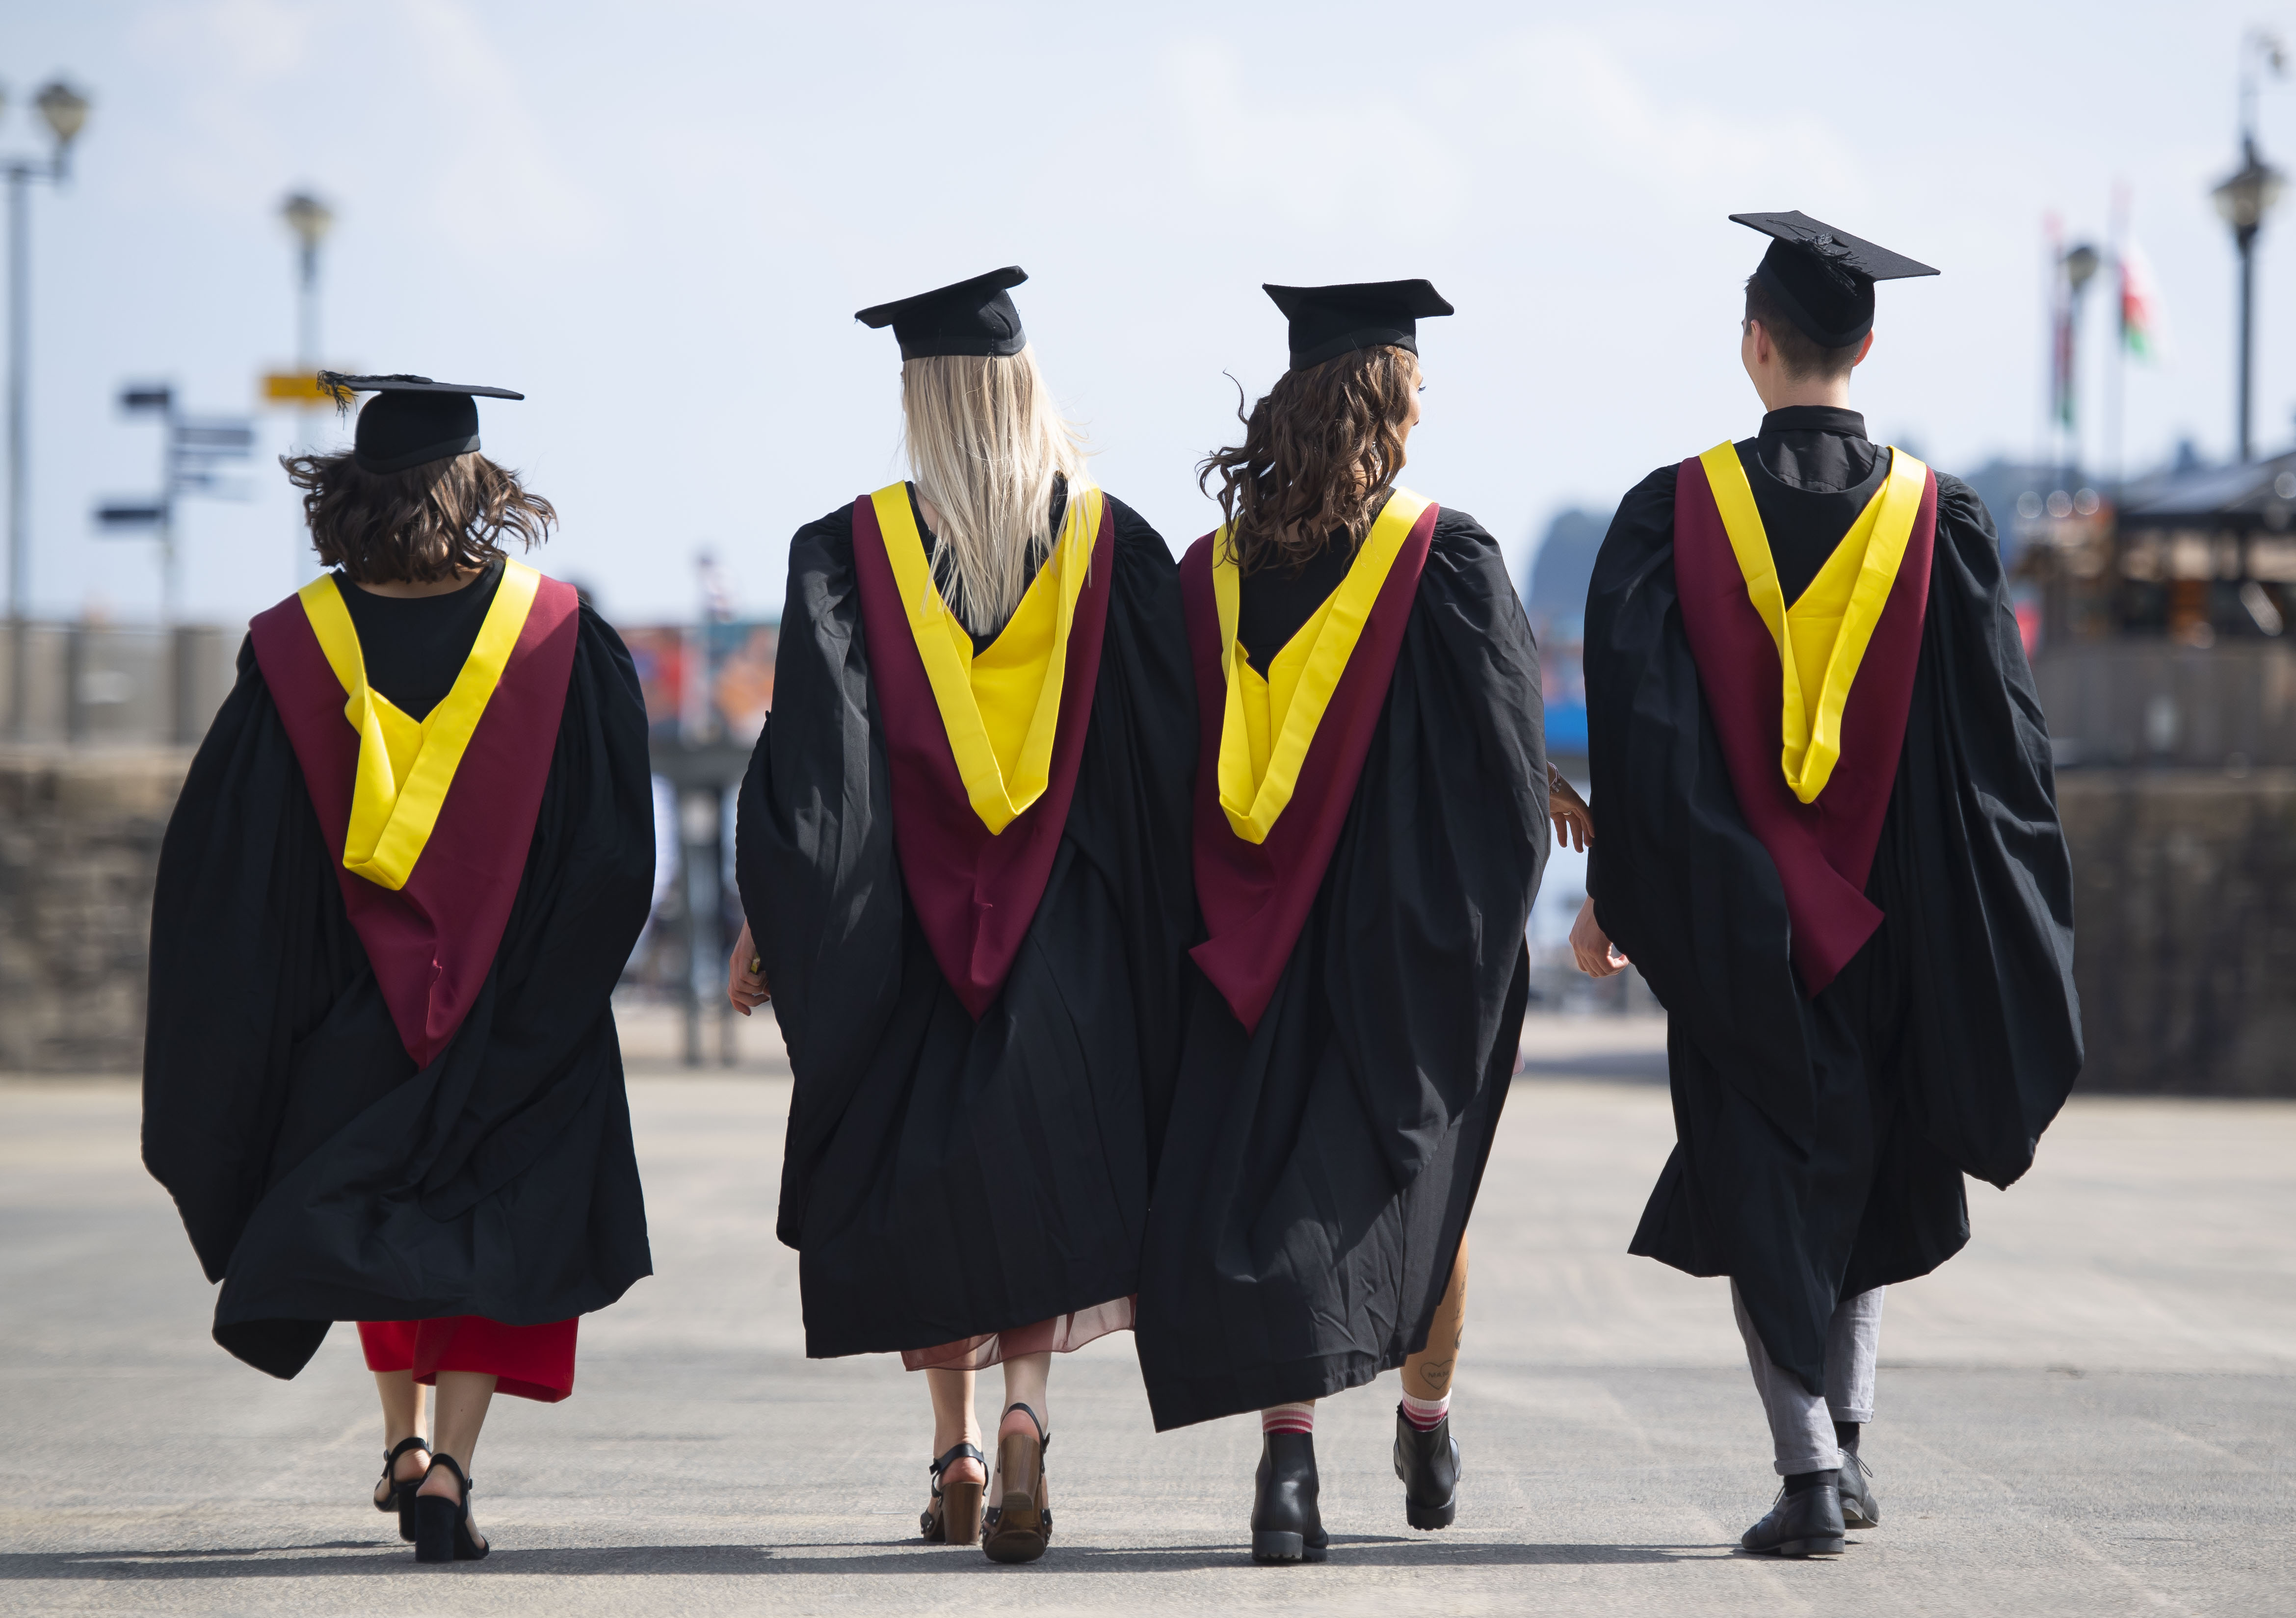 Four students in graduation robes walking away from the camera